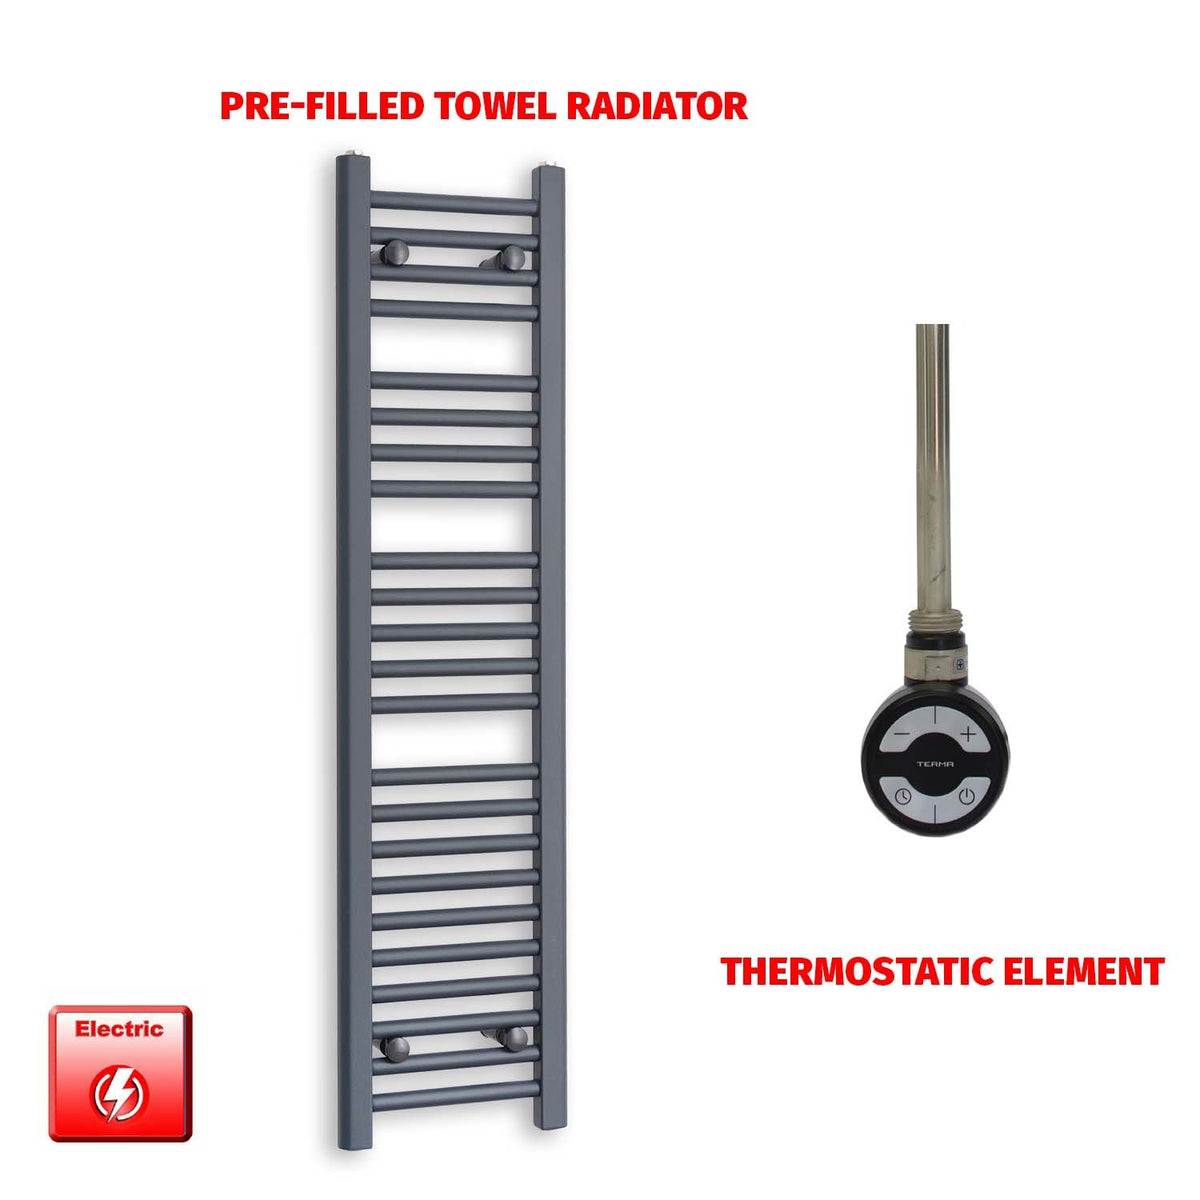 1200mm High 300mm Wide Flat Anthracite Pre-Filled Electric Heated Towel Rail Radiator HTR MOA Thermostatic element no timer